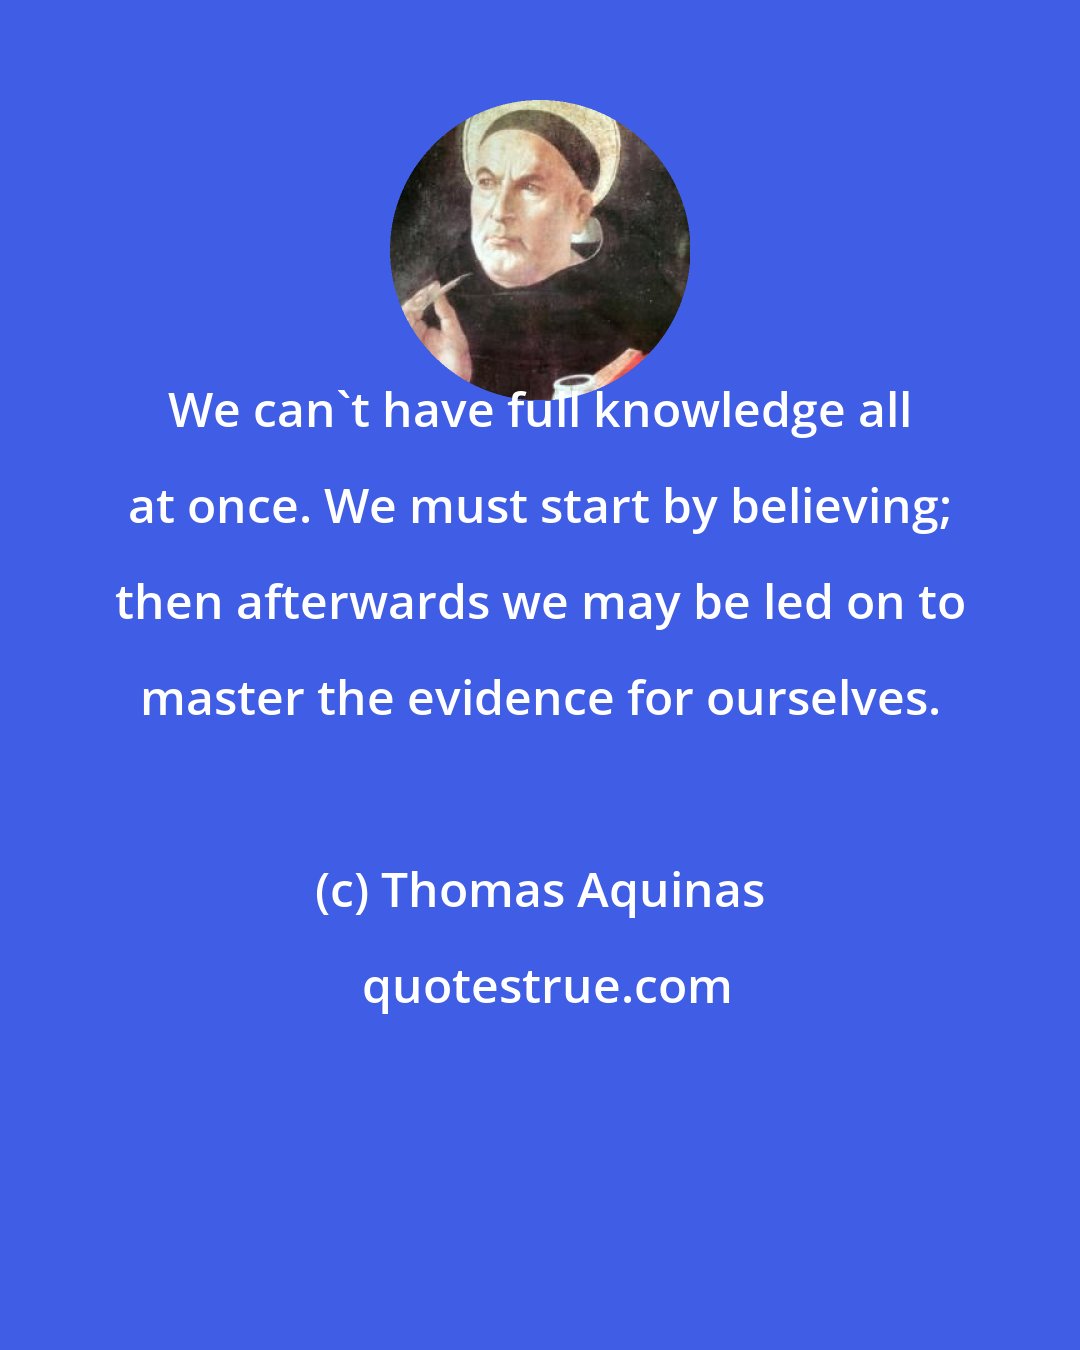 Thomas Aquinas: We can't have full knowledge all at once. We must start by believing; then afterwards we may be led on to master the evidence for ourselves.